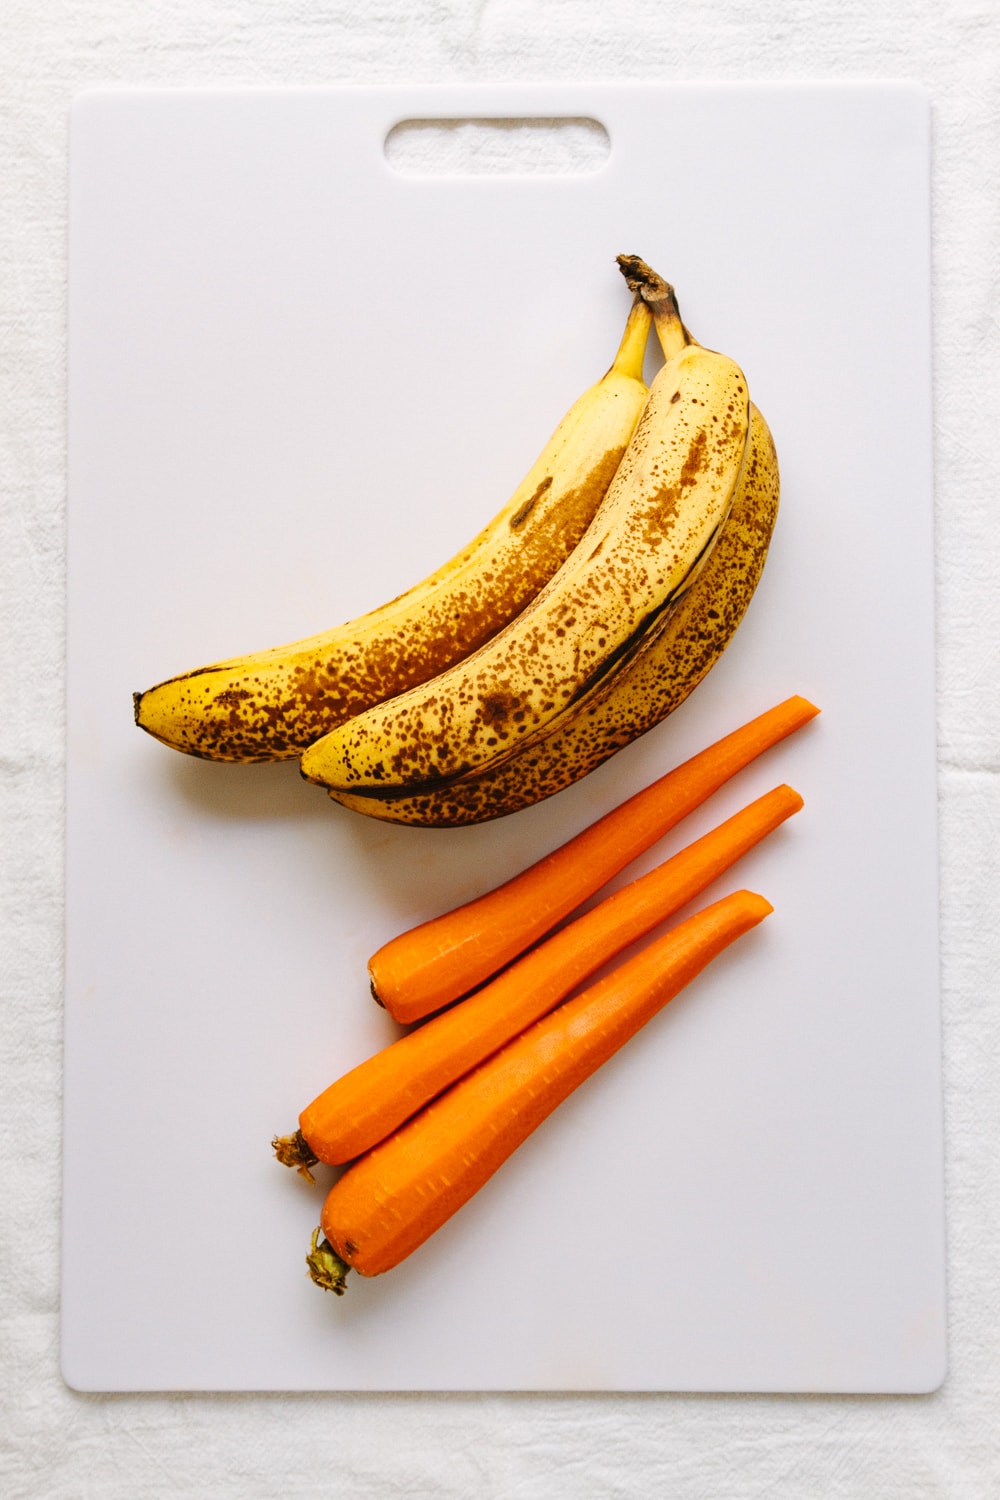 top down view of carrots and bananas on a white cutting board.